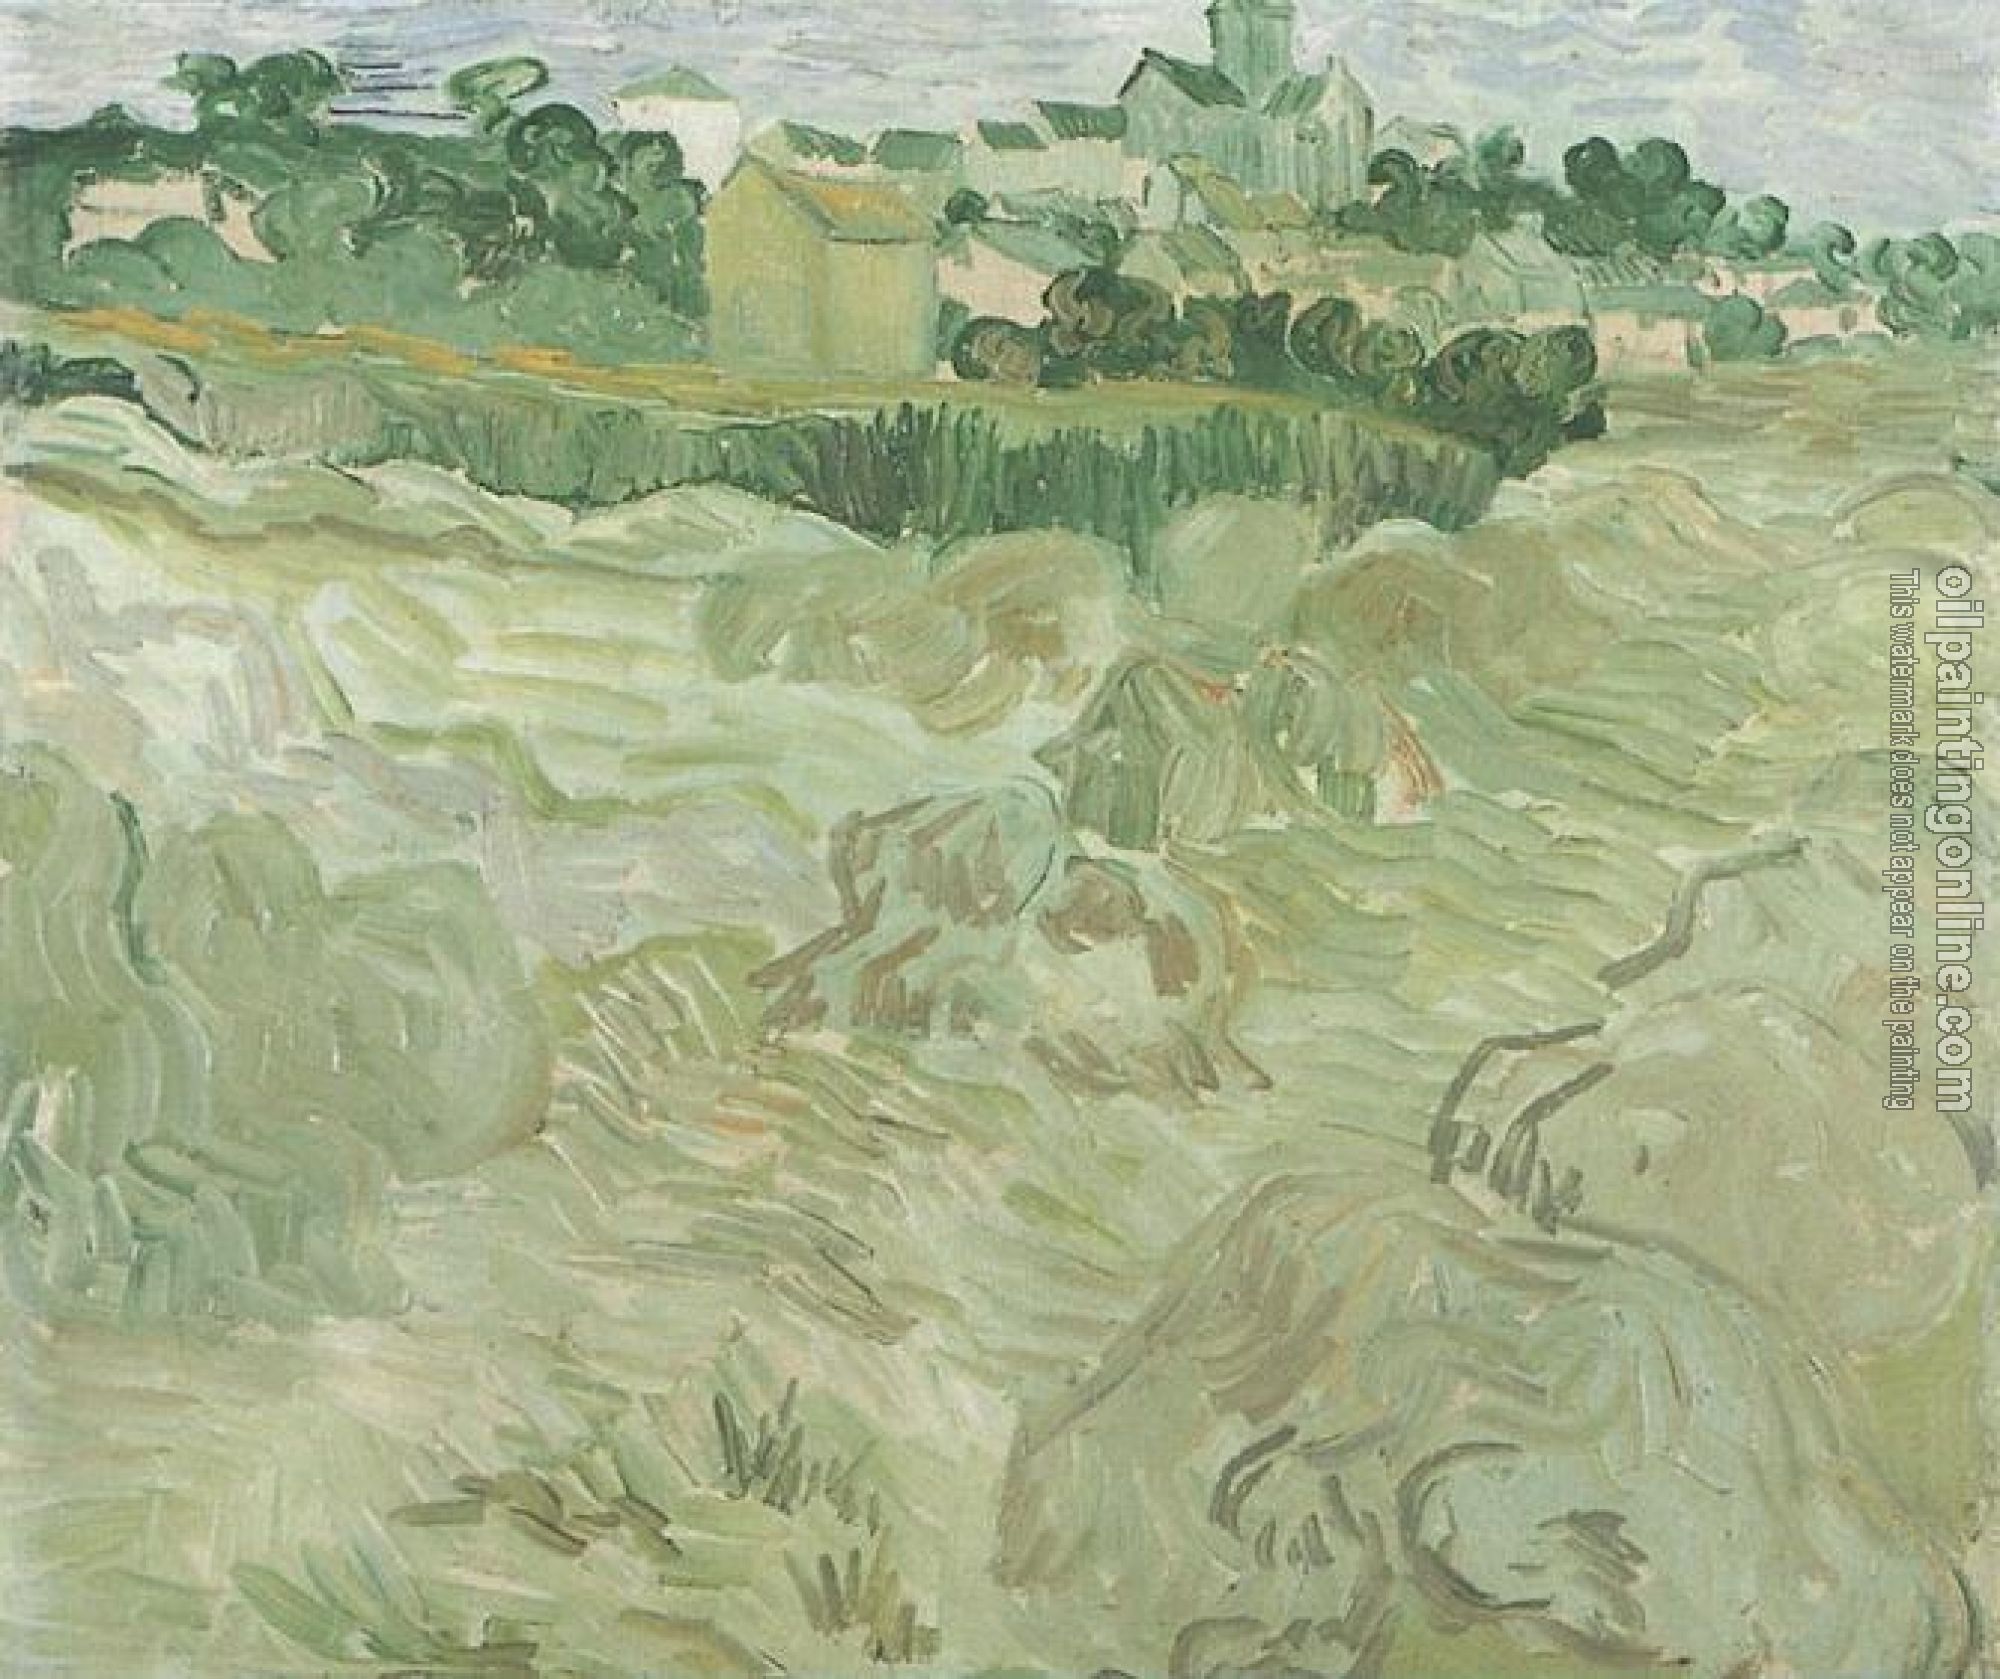 Gogh, Vincent van - Wheat Fields with Auvers in the Background